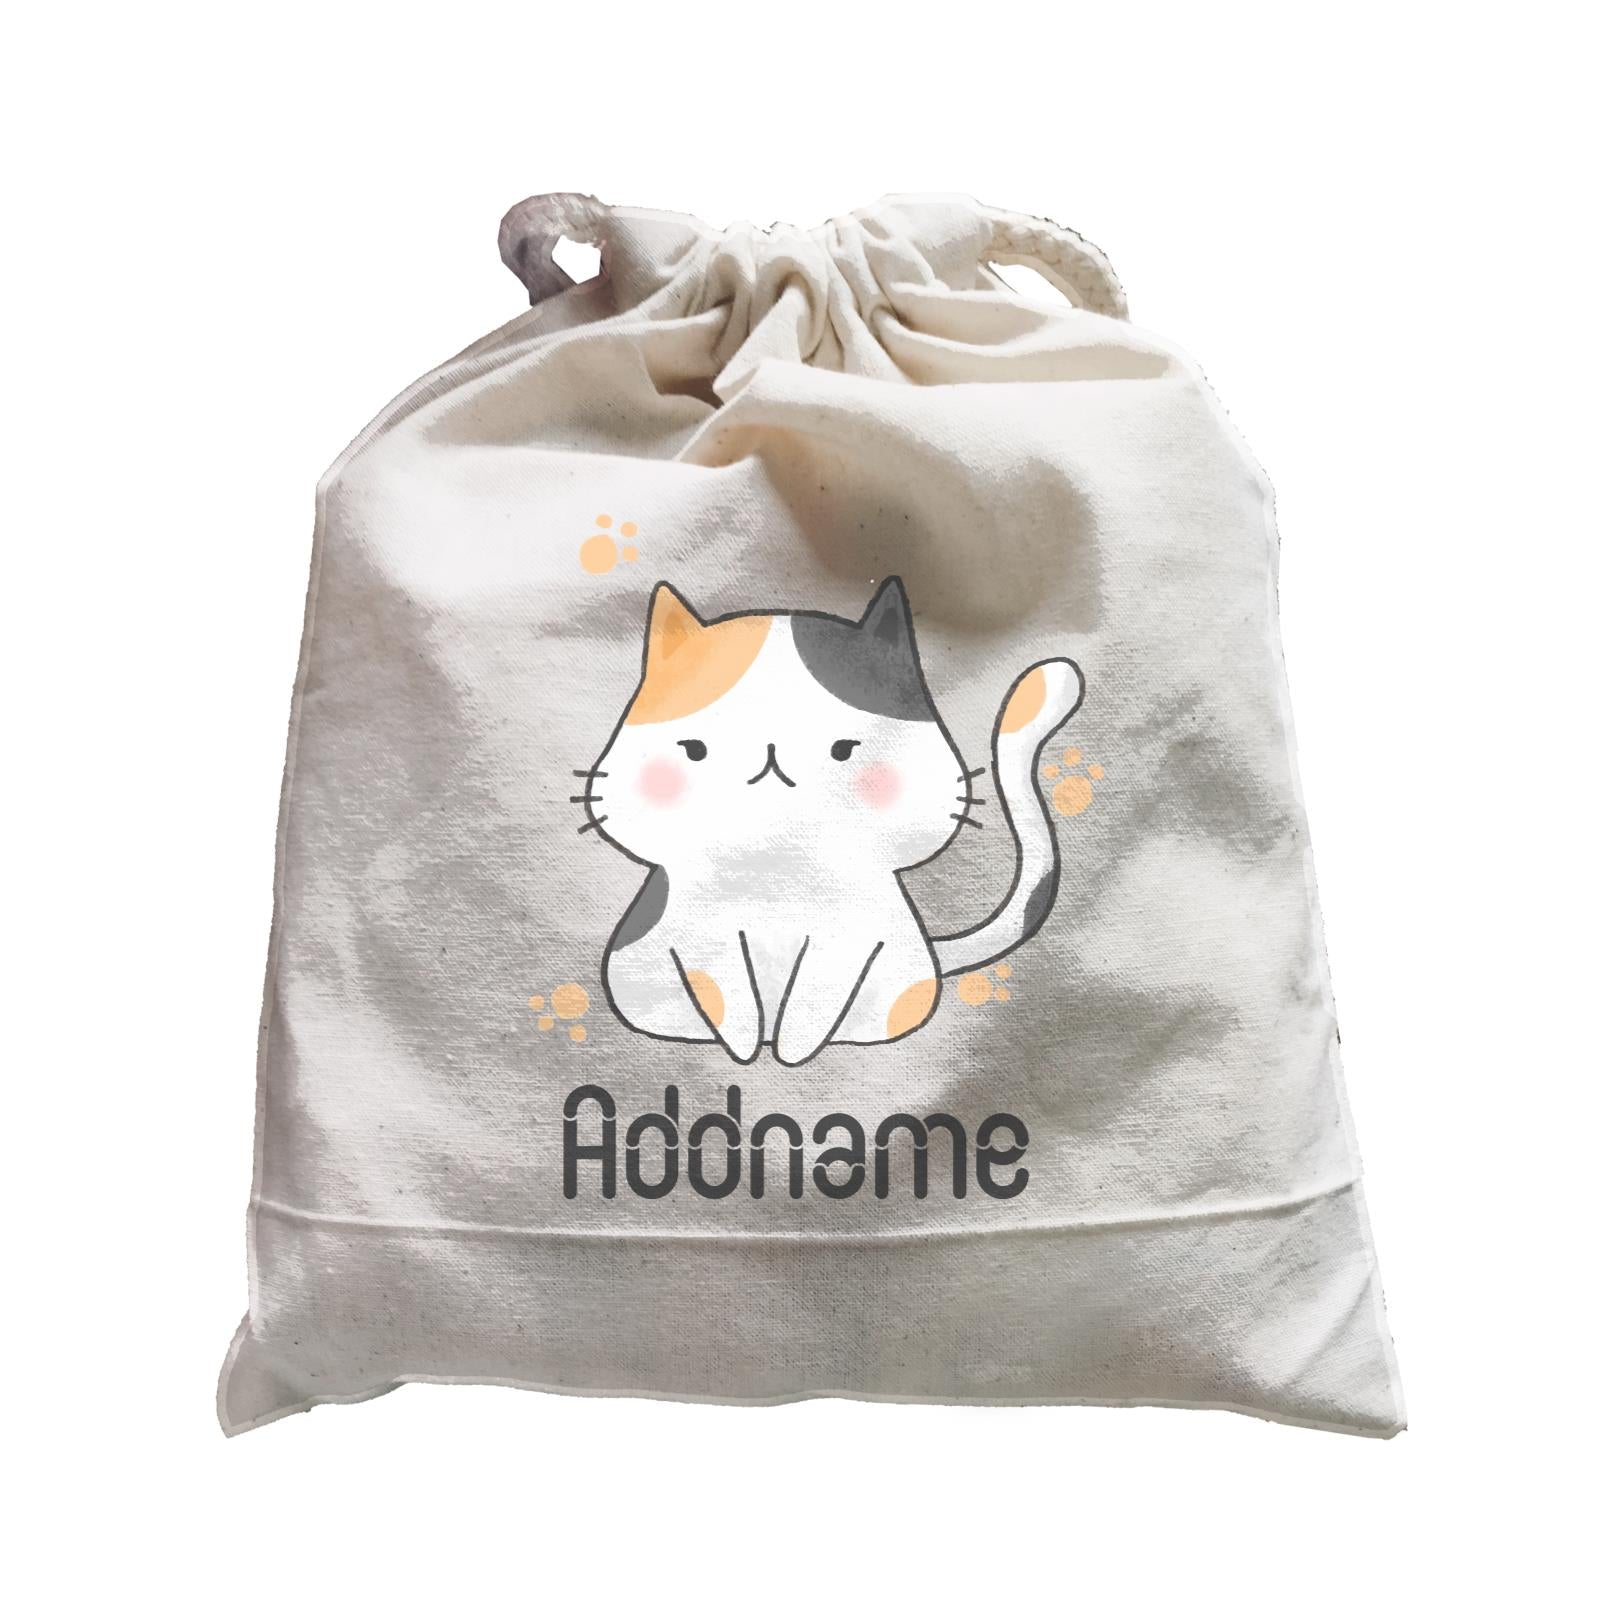 Cute Hand Drawn Style Cat Addname Satchel